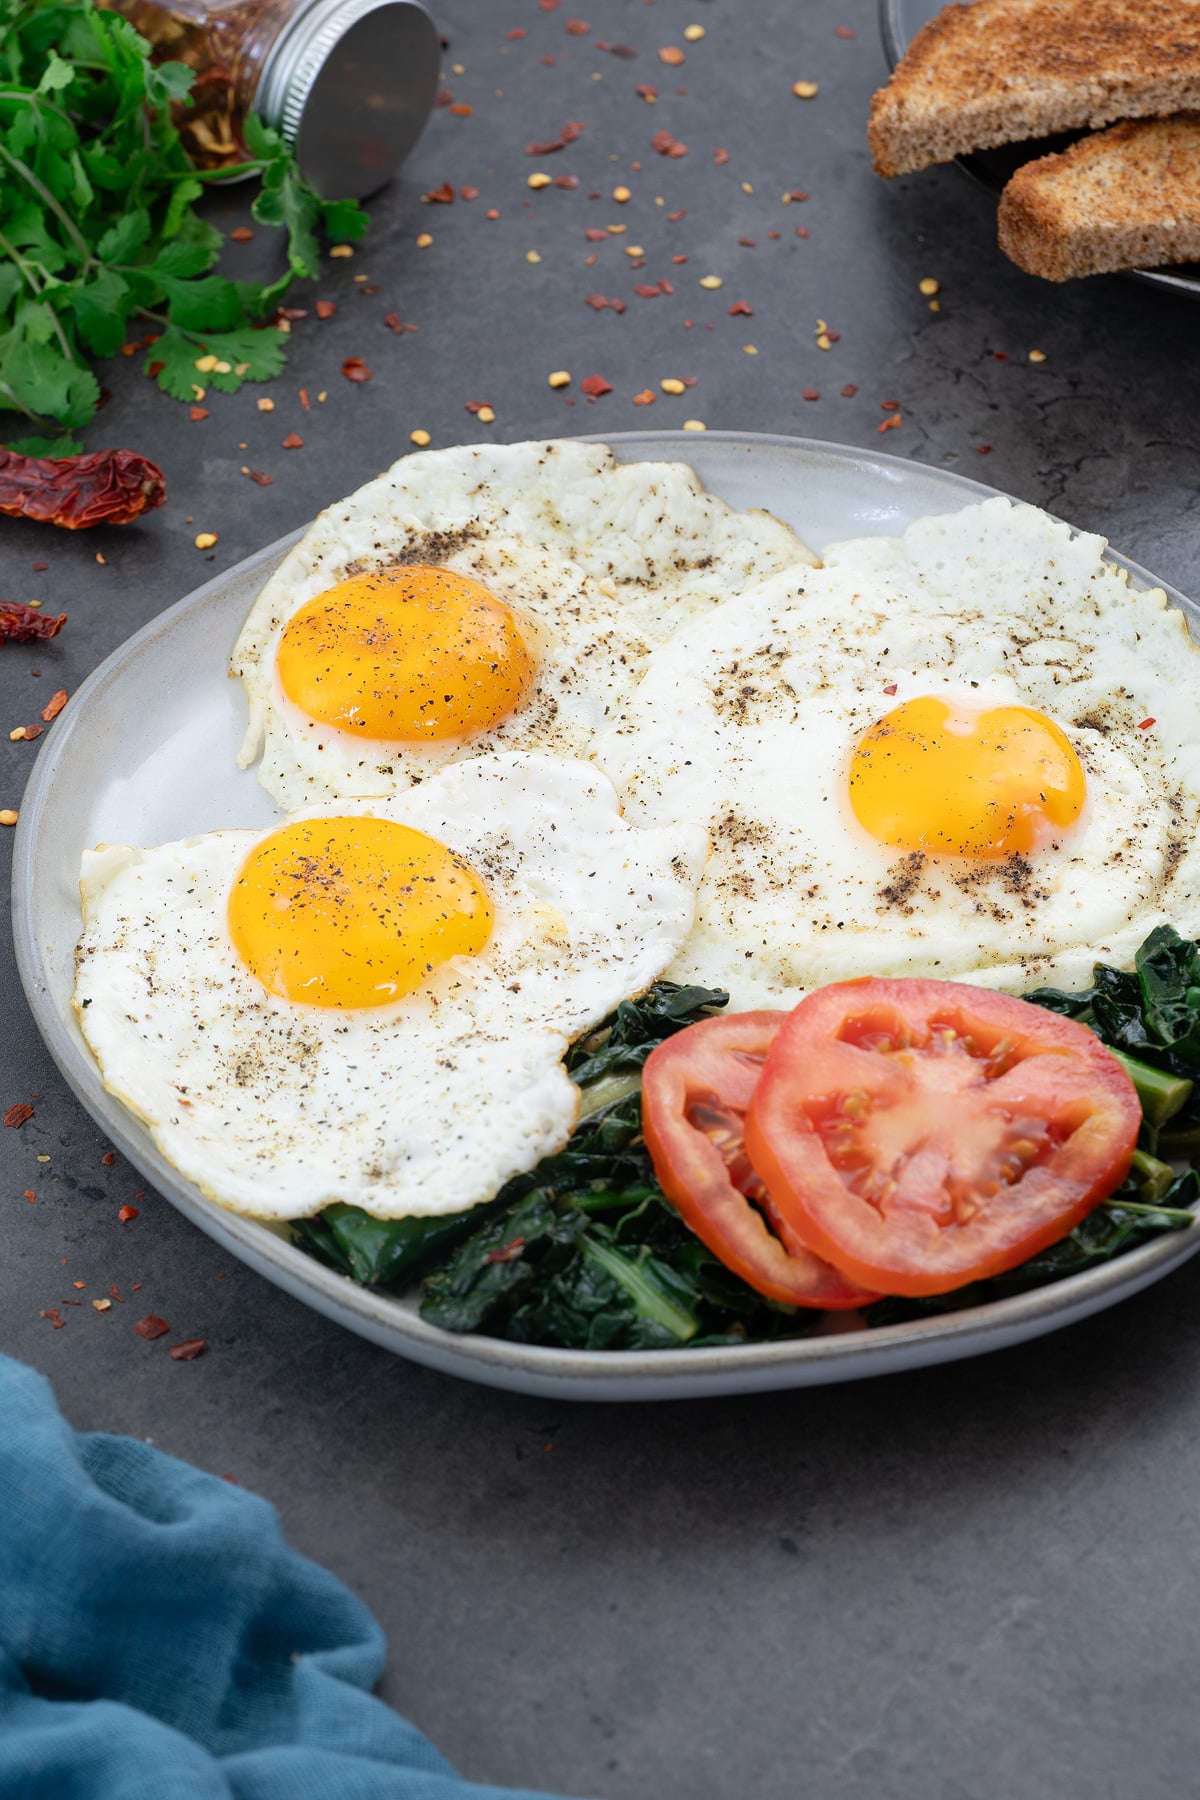 Sunny-side up eggs on a white plate, with kale and tomato slices, bread, and greens placed around.